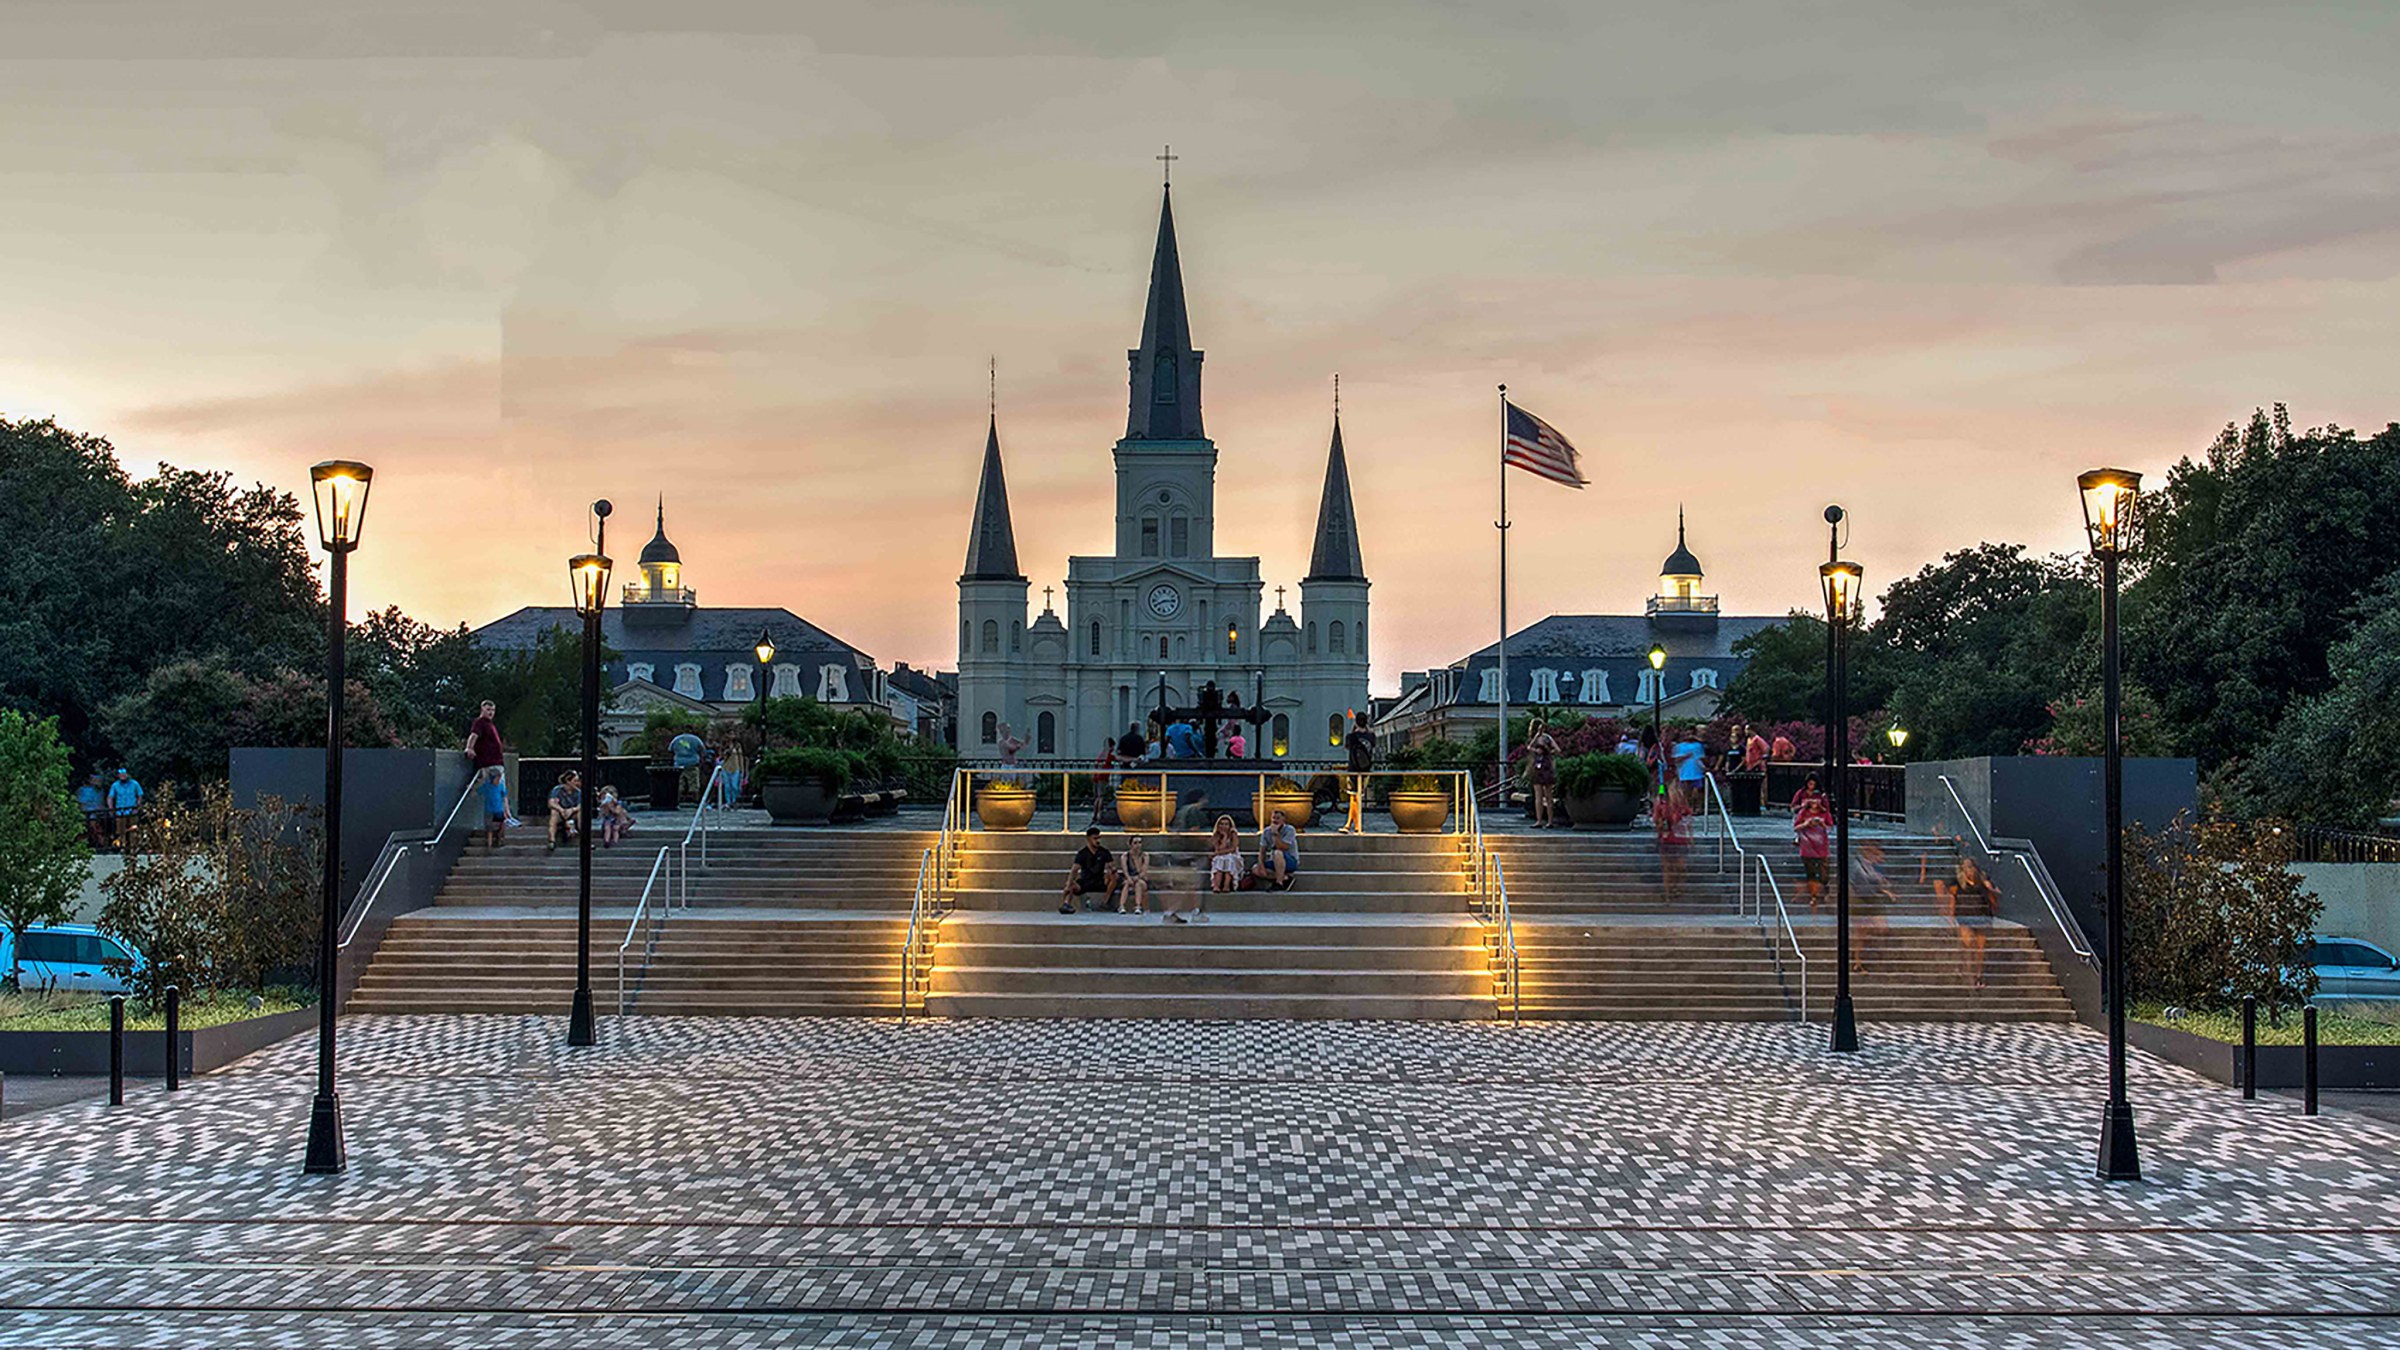 Outdoor plaza at dusk with wide ascending stairs in the background and St. Louis Cathedral in the distant background